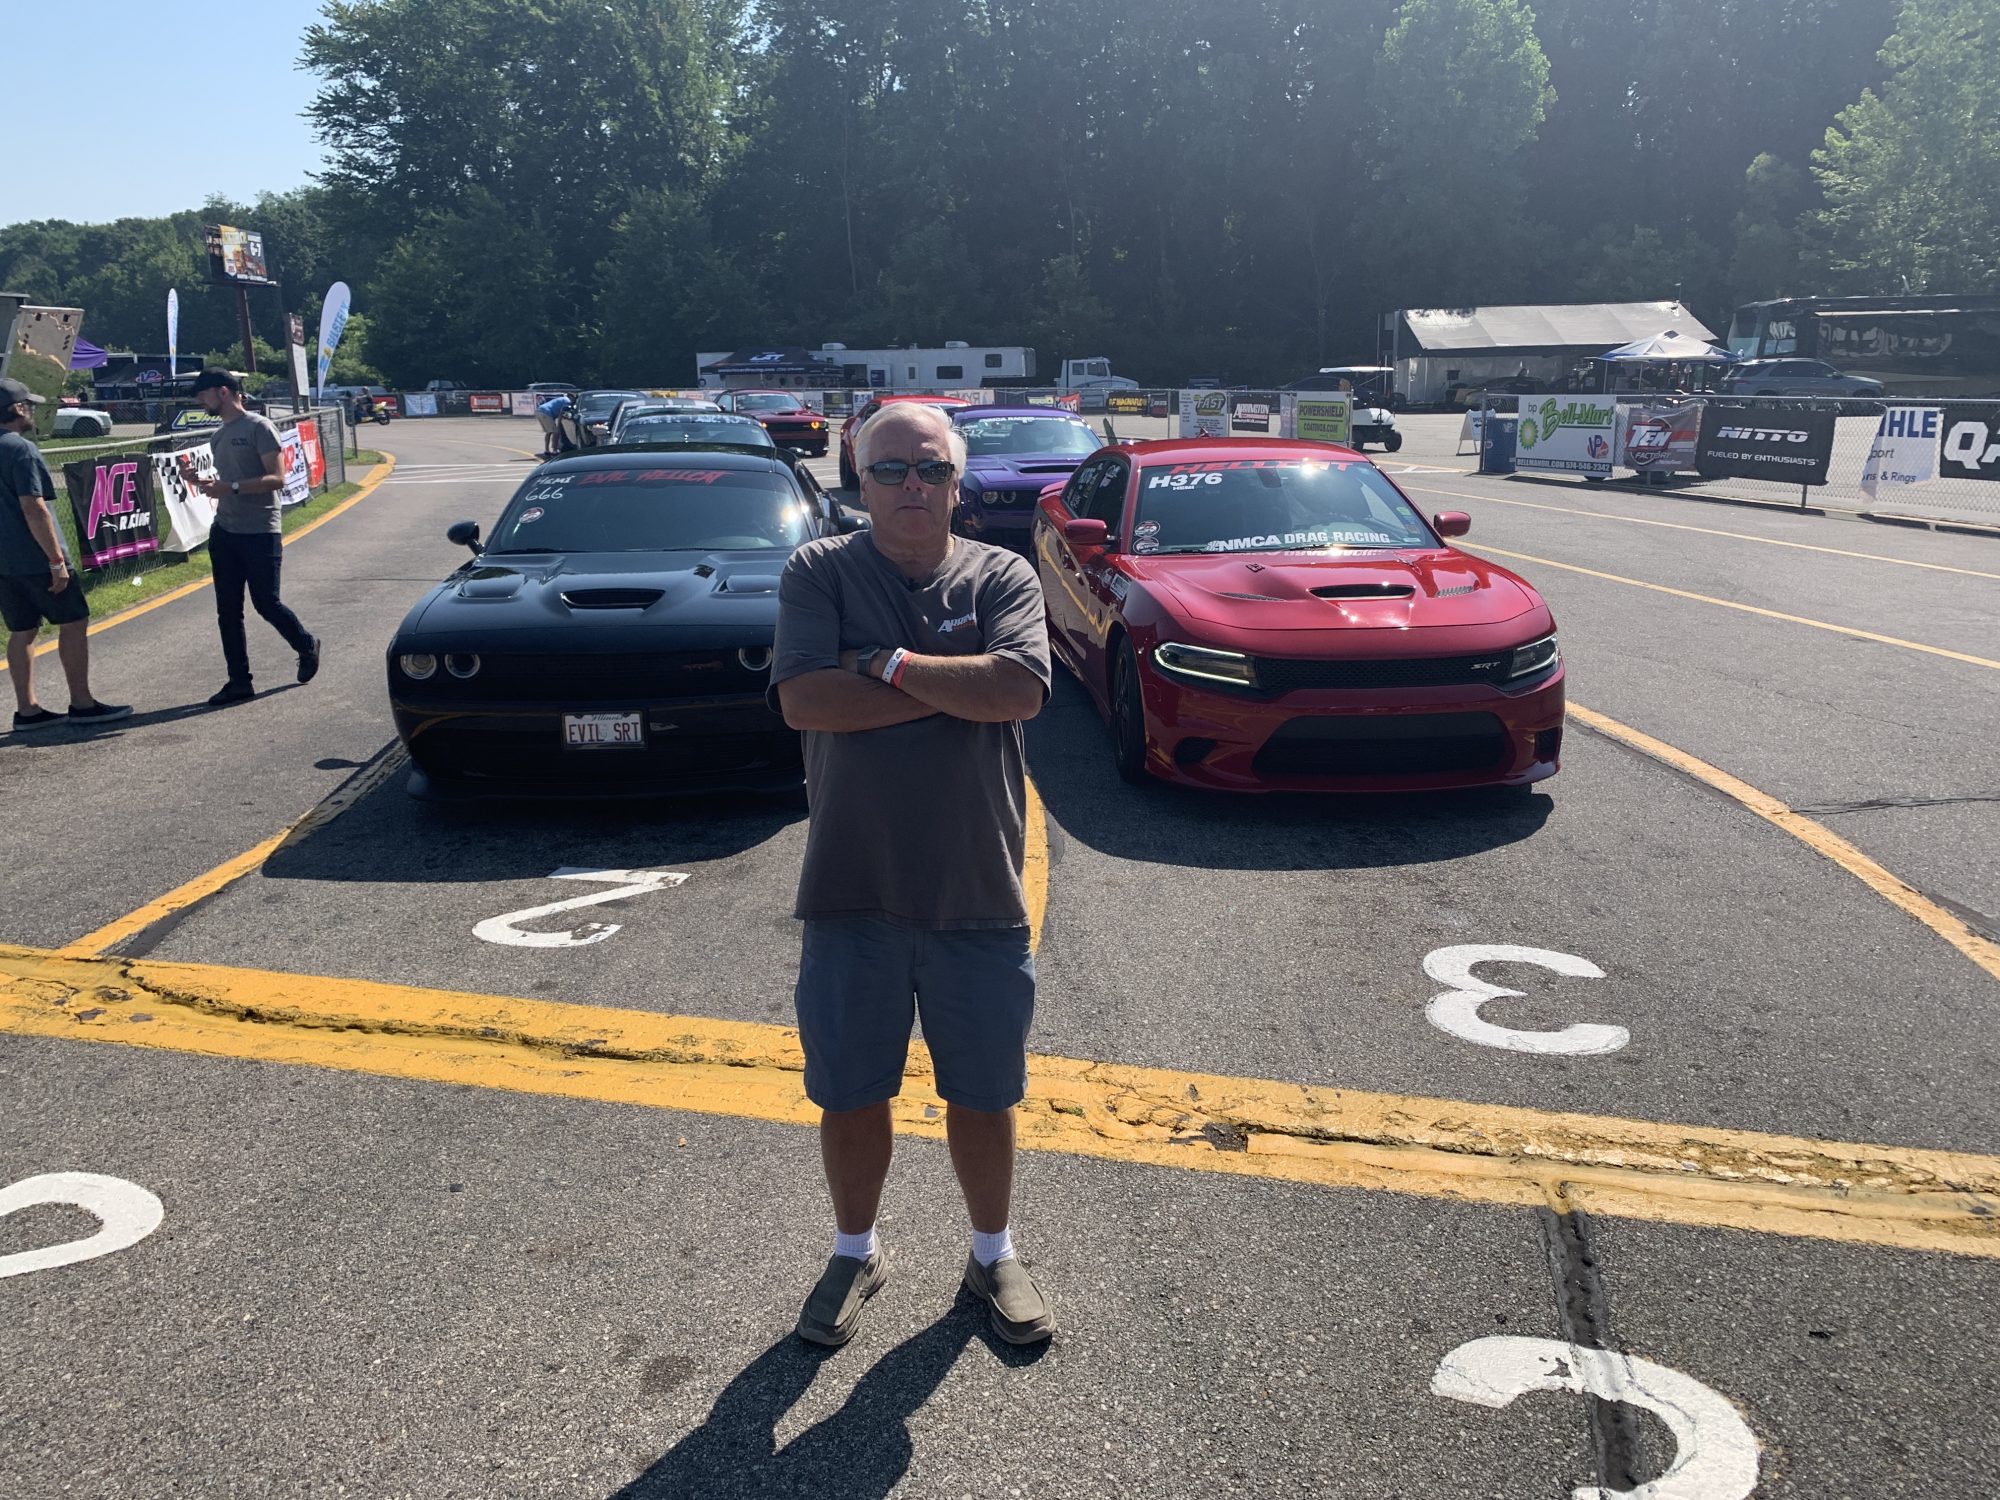 Man posing in front of line of Dodge vehicles